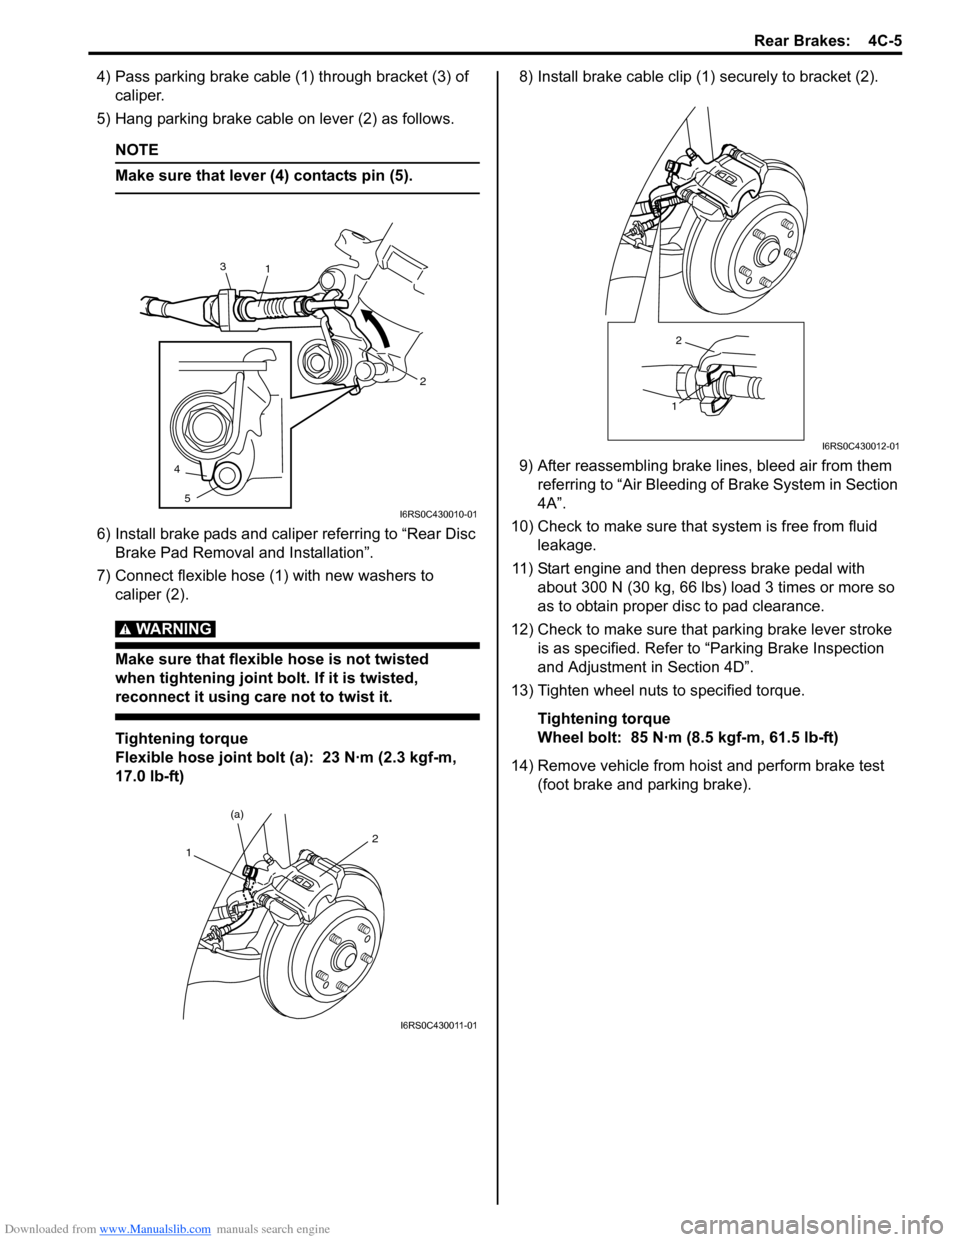 SUZUKI SWIFT 2008 2.G Service User Guide Downloaded from www.Manualslib.com manuals search engine Rear Brakes:  4C-5
4) Pass parking brake cable (1) through bracket (3) of caliper.
5) Hang parking brake cable on lever (2) as follows.
NOTE
Ma